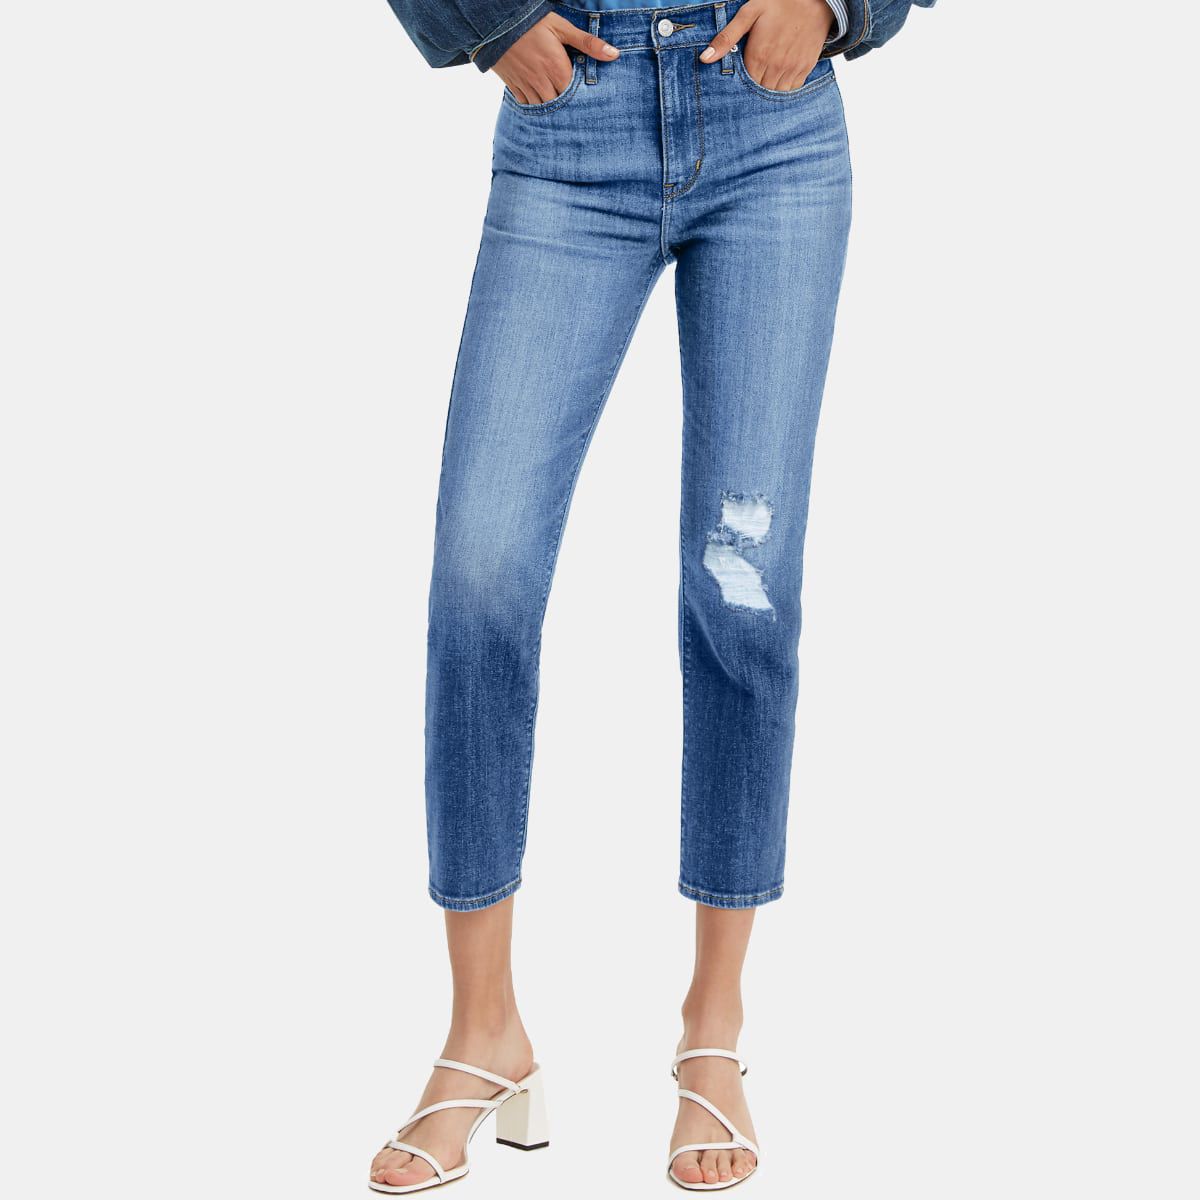 Capris & Cropped High Rise Jeans For Women - Macy's